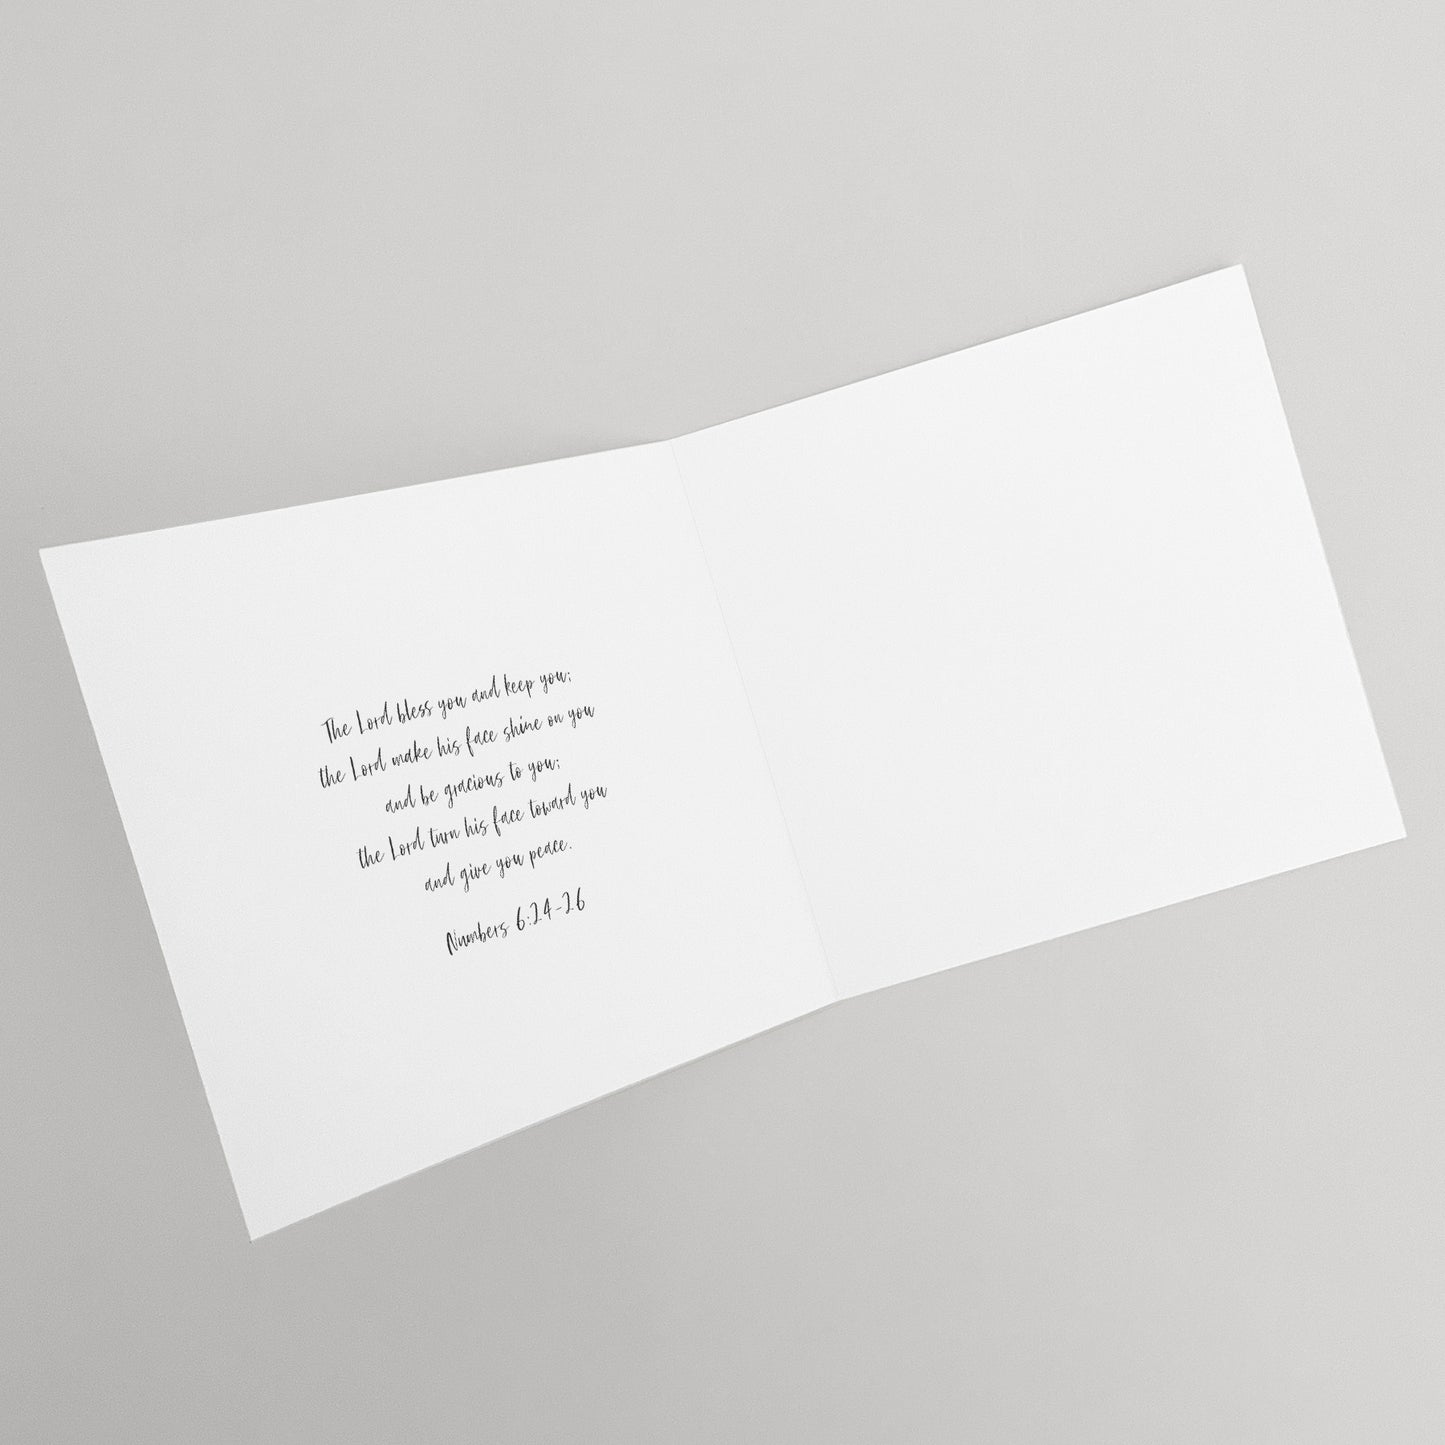 'With Love On Your Dedication' Greeting Card & Envelope